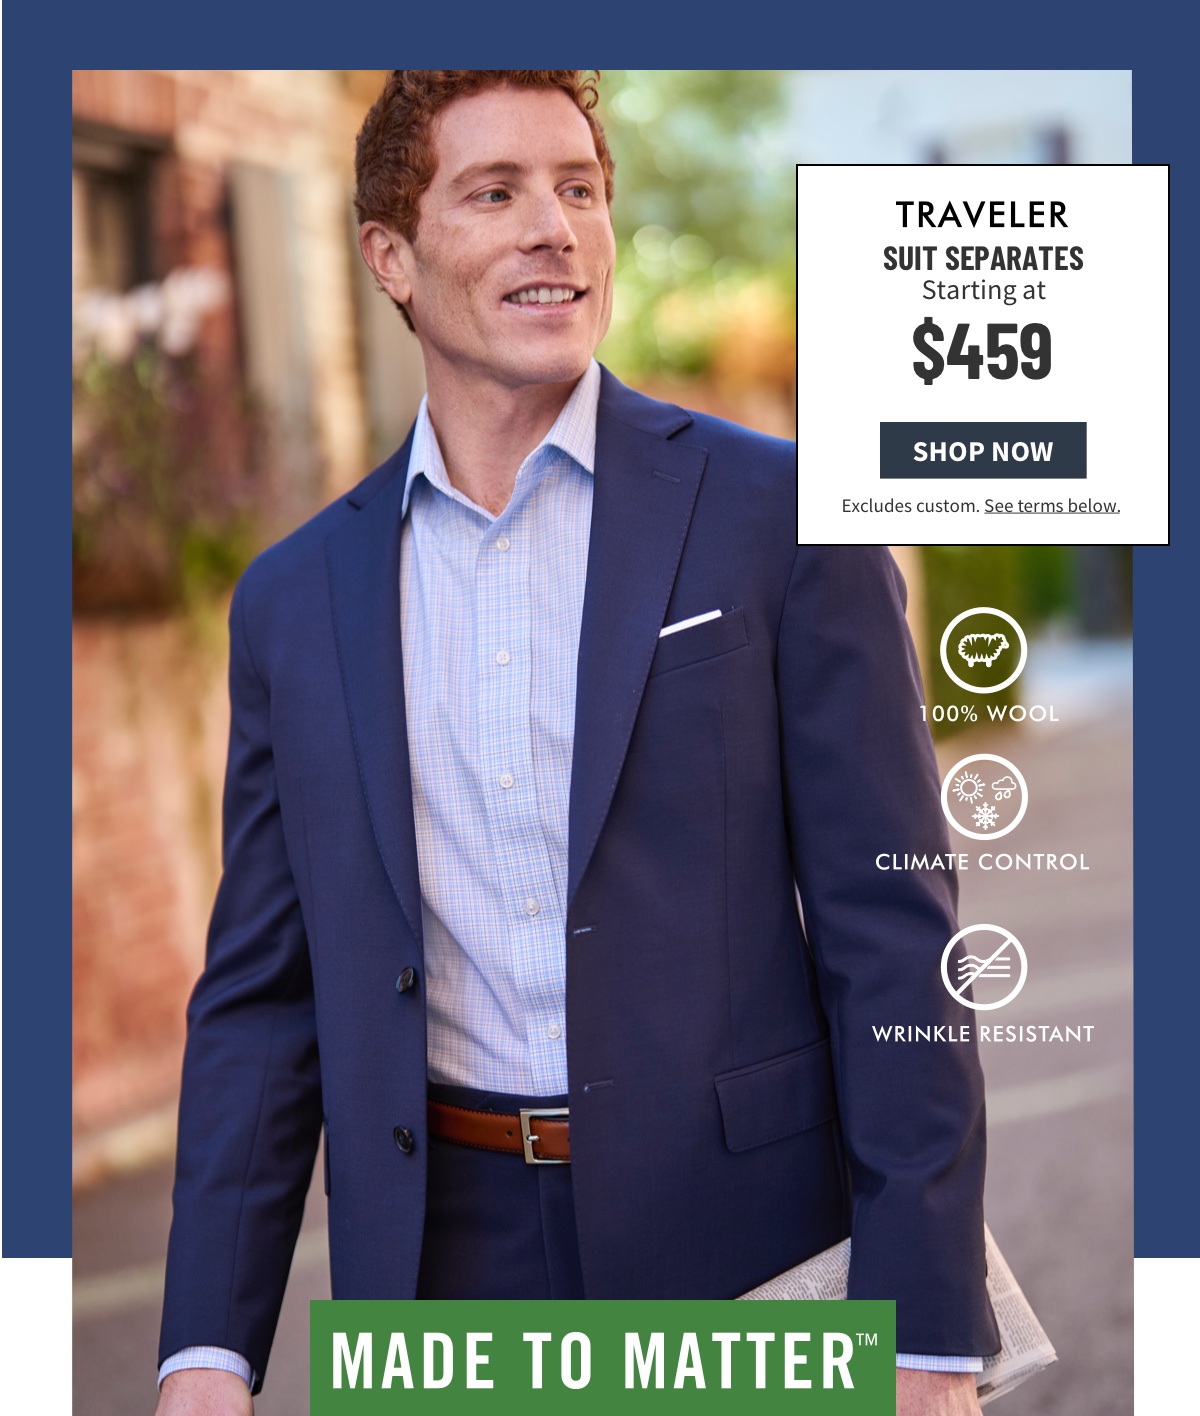 Traveler Suit Separates Starting at $459 Shop Now Excludes custom. See terms below. 100% Wool Climate Control Wrinkle Resistant